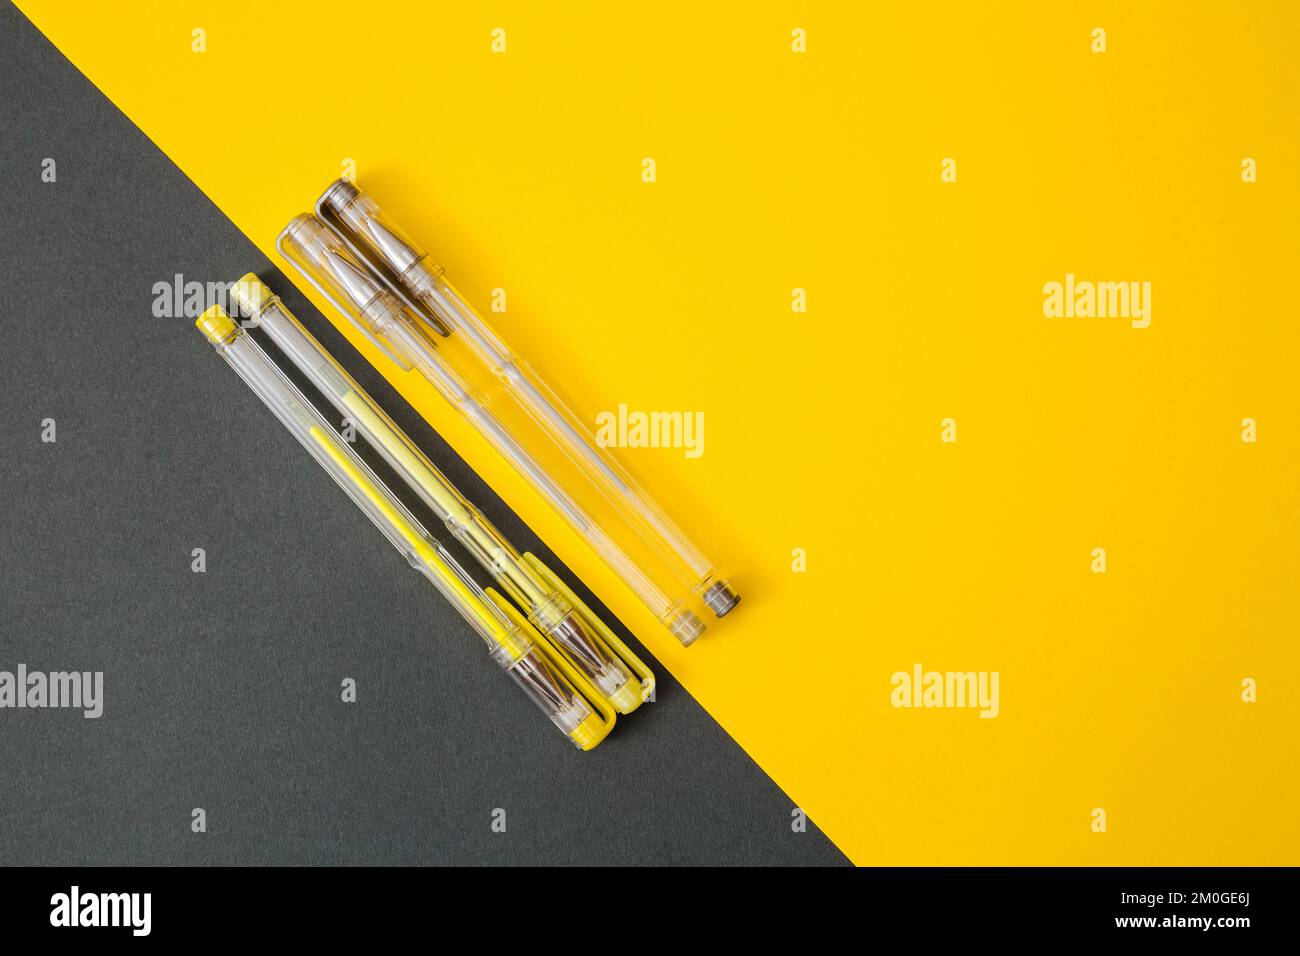 Yellow and gray gel pens on a yellow and gray background. Stock Photo